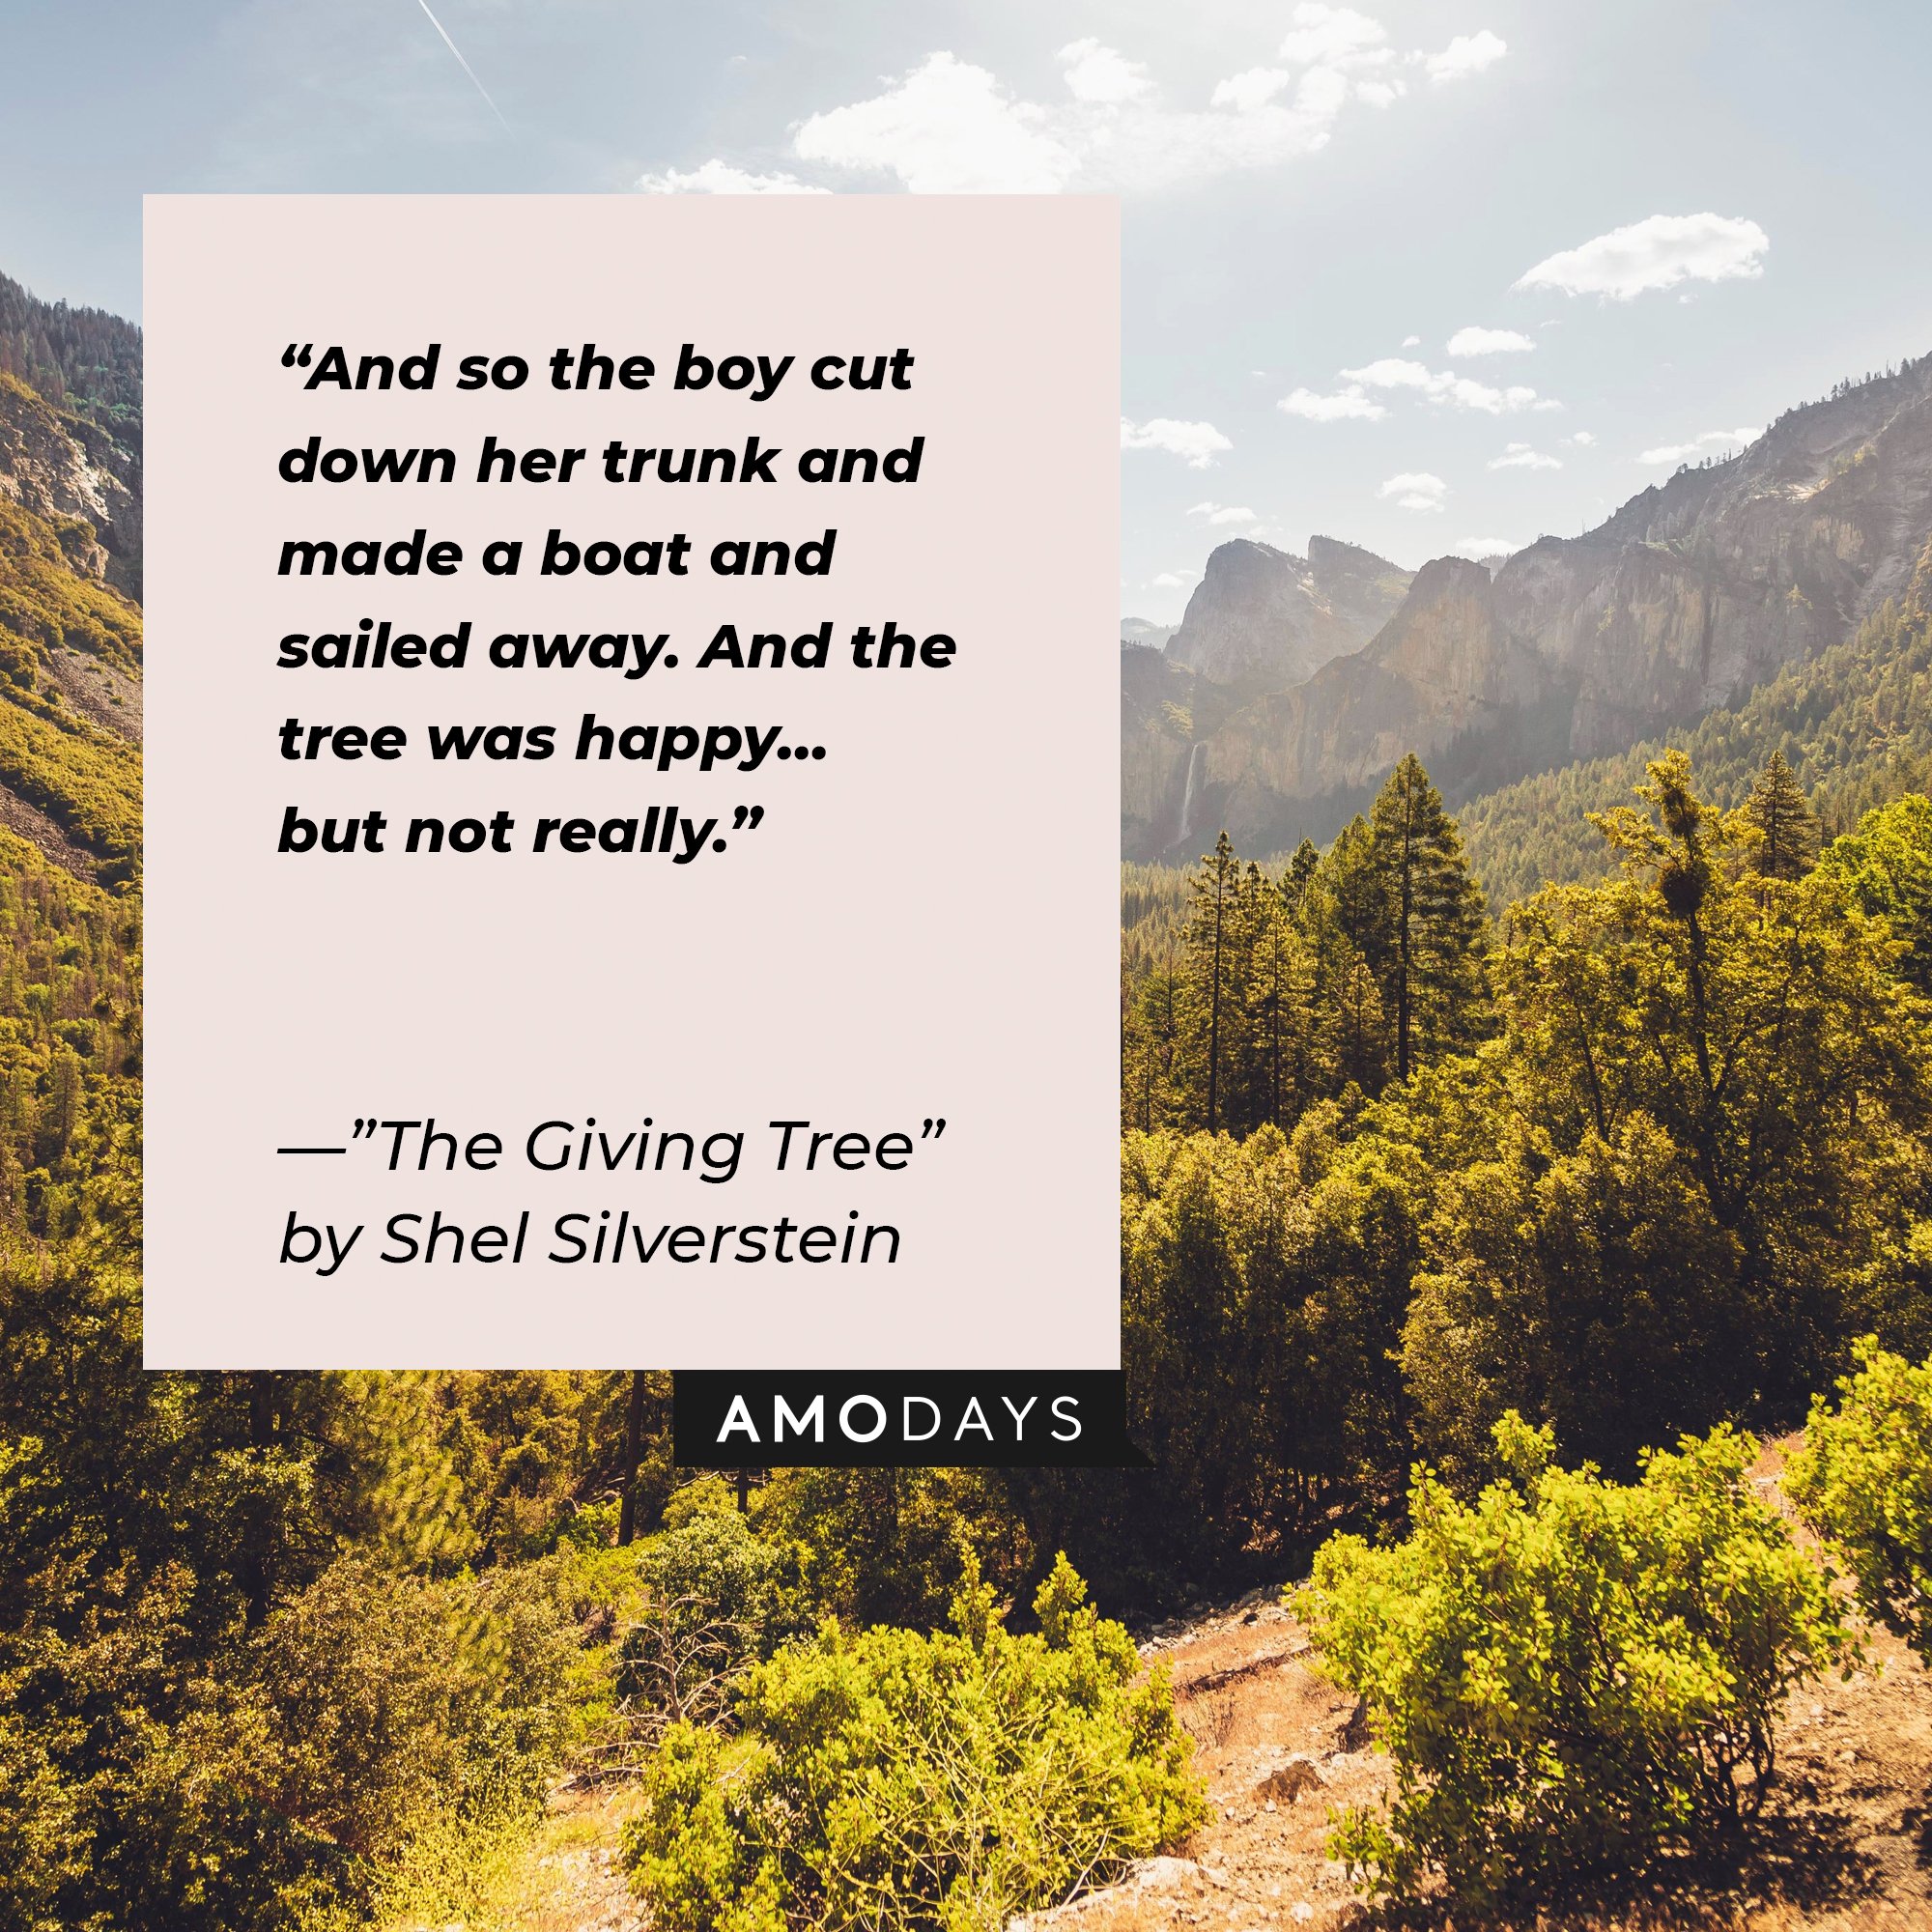 Quotes from Shel Silverstein’s "Giving Tree”: "And so the boy cut down her trunk and made a boat and sailed away. And the tree was happy…but not really." | Image: AmoDays